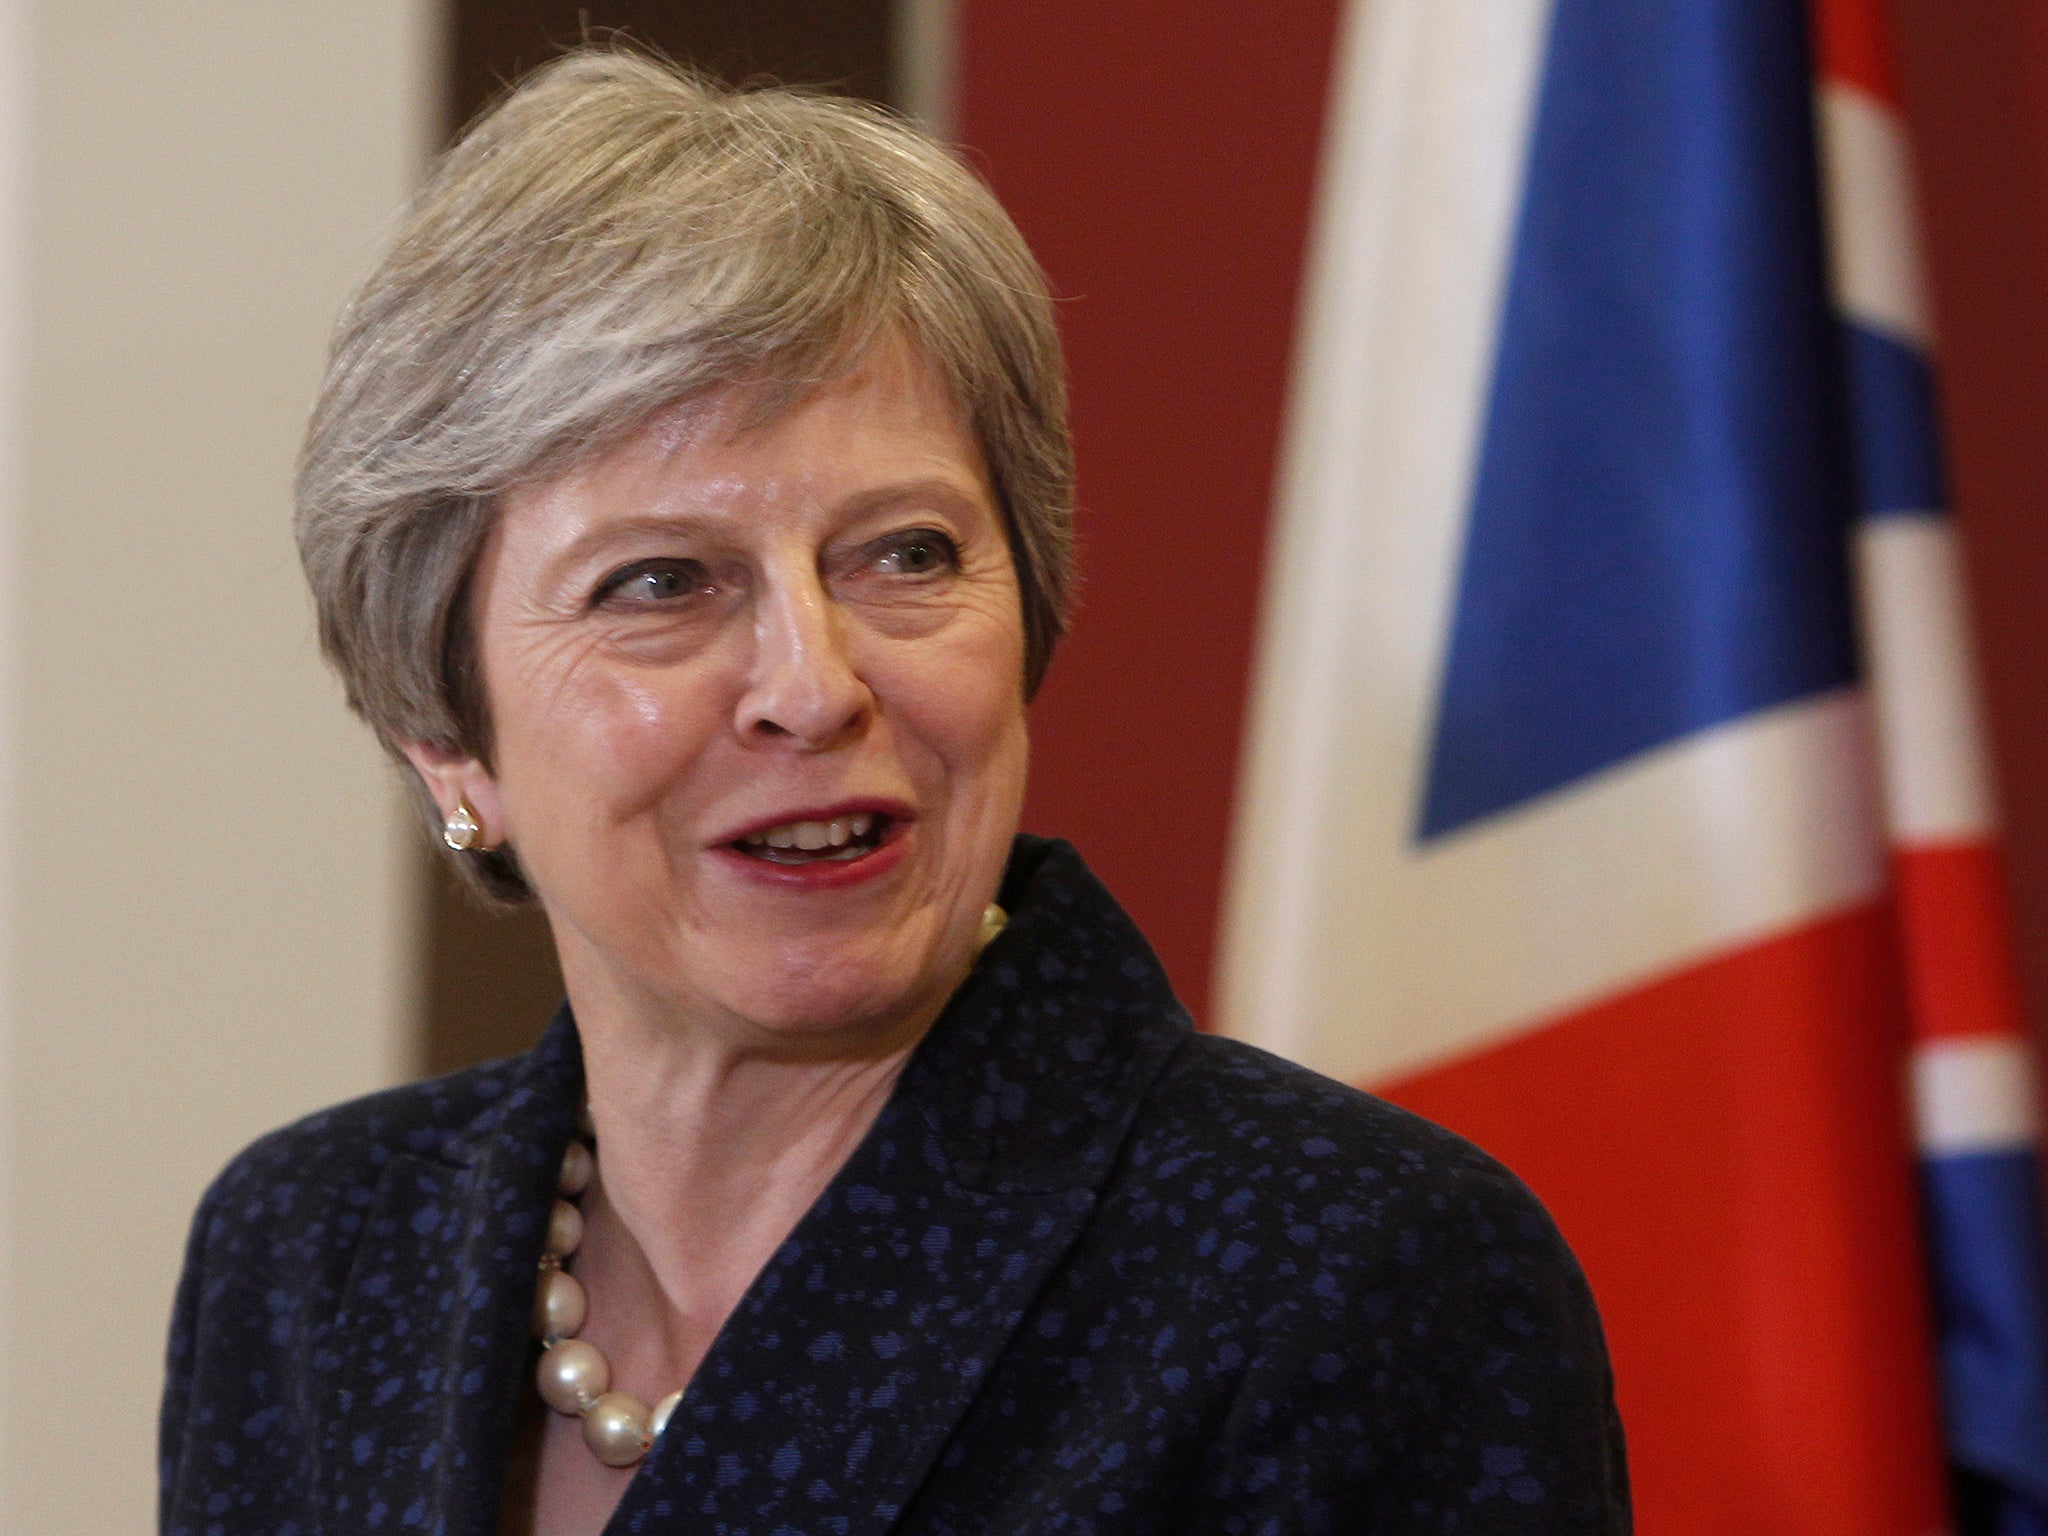 Theresa May&apos;s Tories must expand their appeal or &apos;forfeit political relevance&apos;, think tank warns